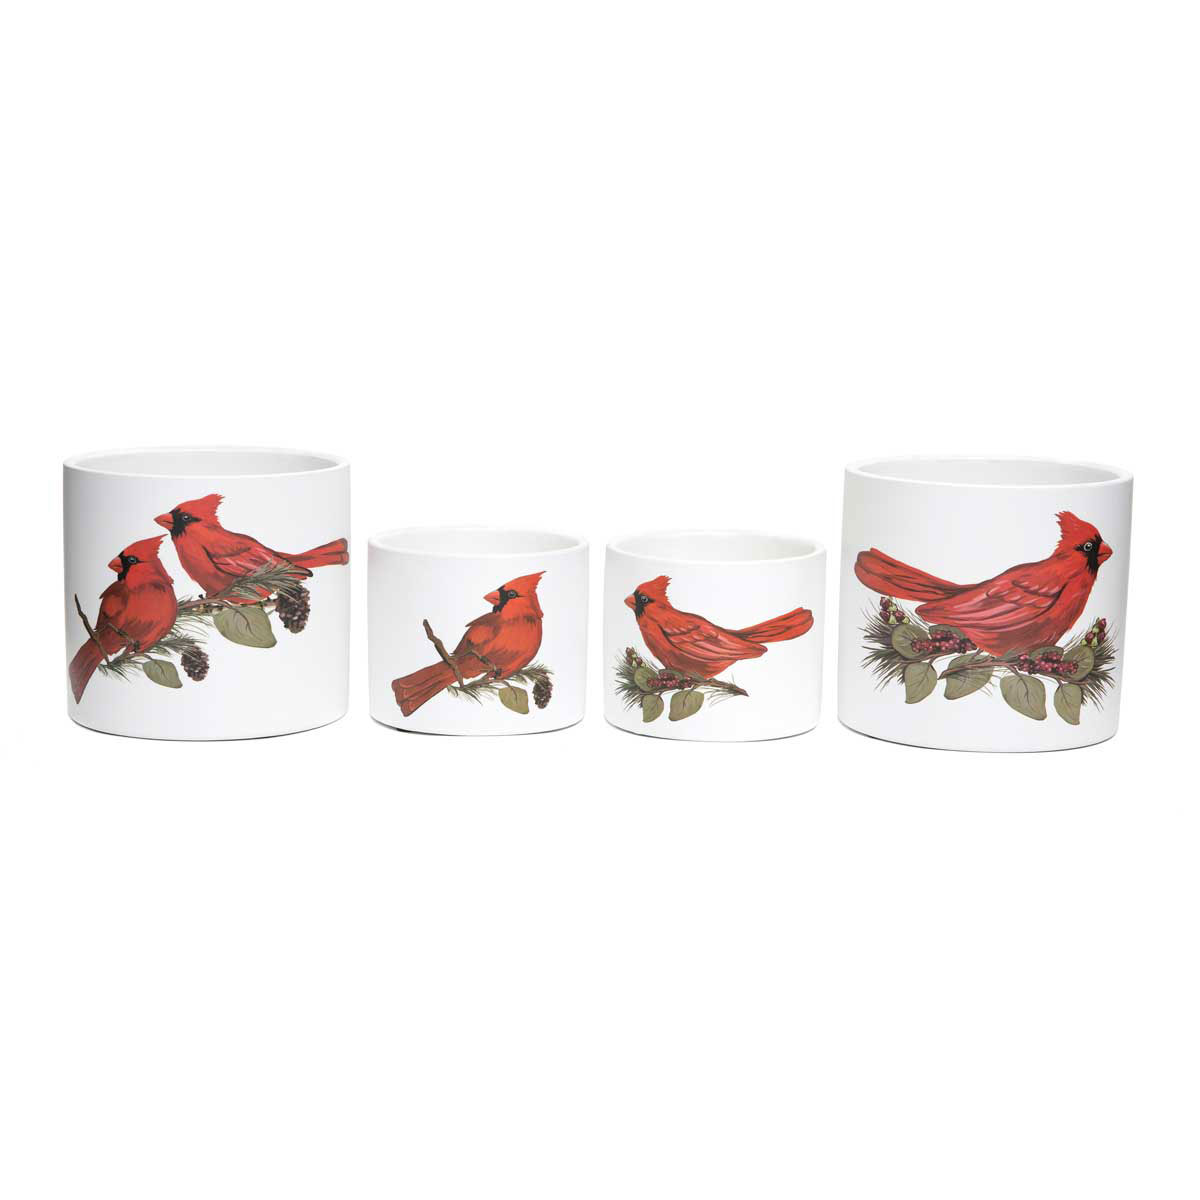 POT CARDINAL LARGE 5.25IN X 4.75IN CERAMIC - Click Image to Close